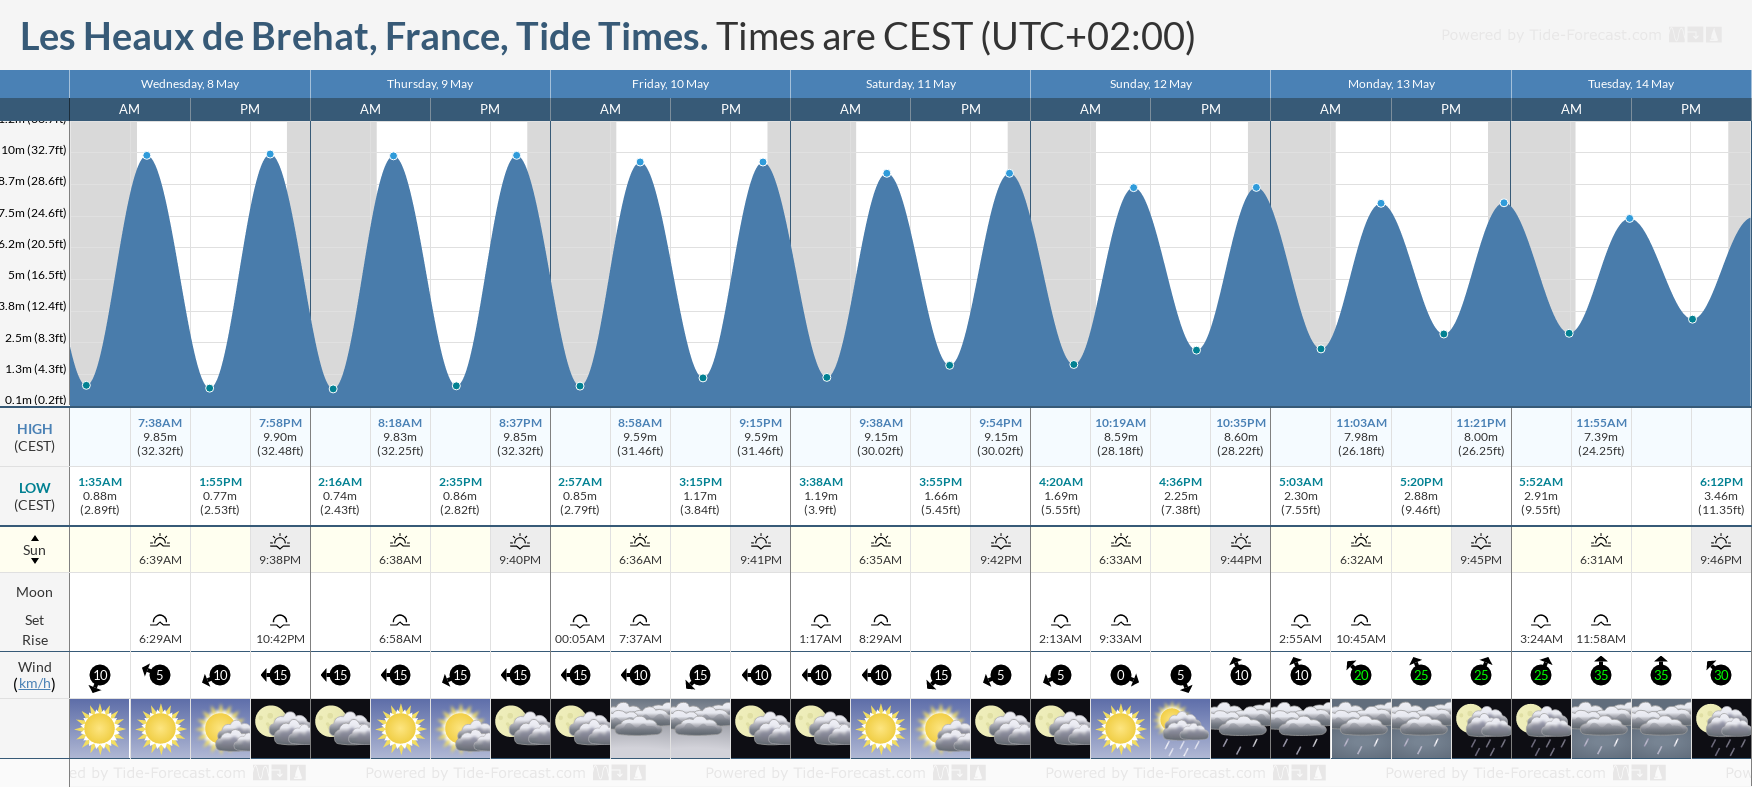 Les Heaux de Brehat, France Tide Chart including high and low tide tide times for the next 7 days